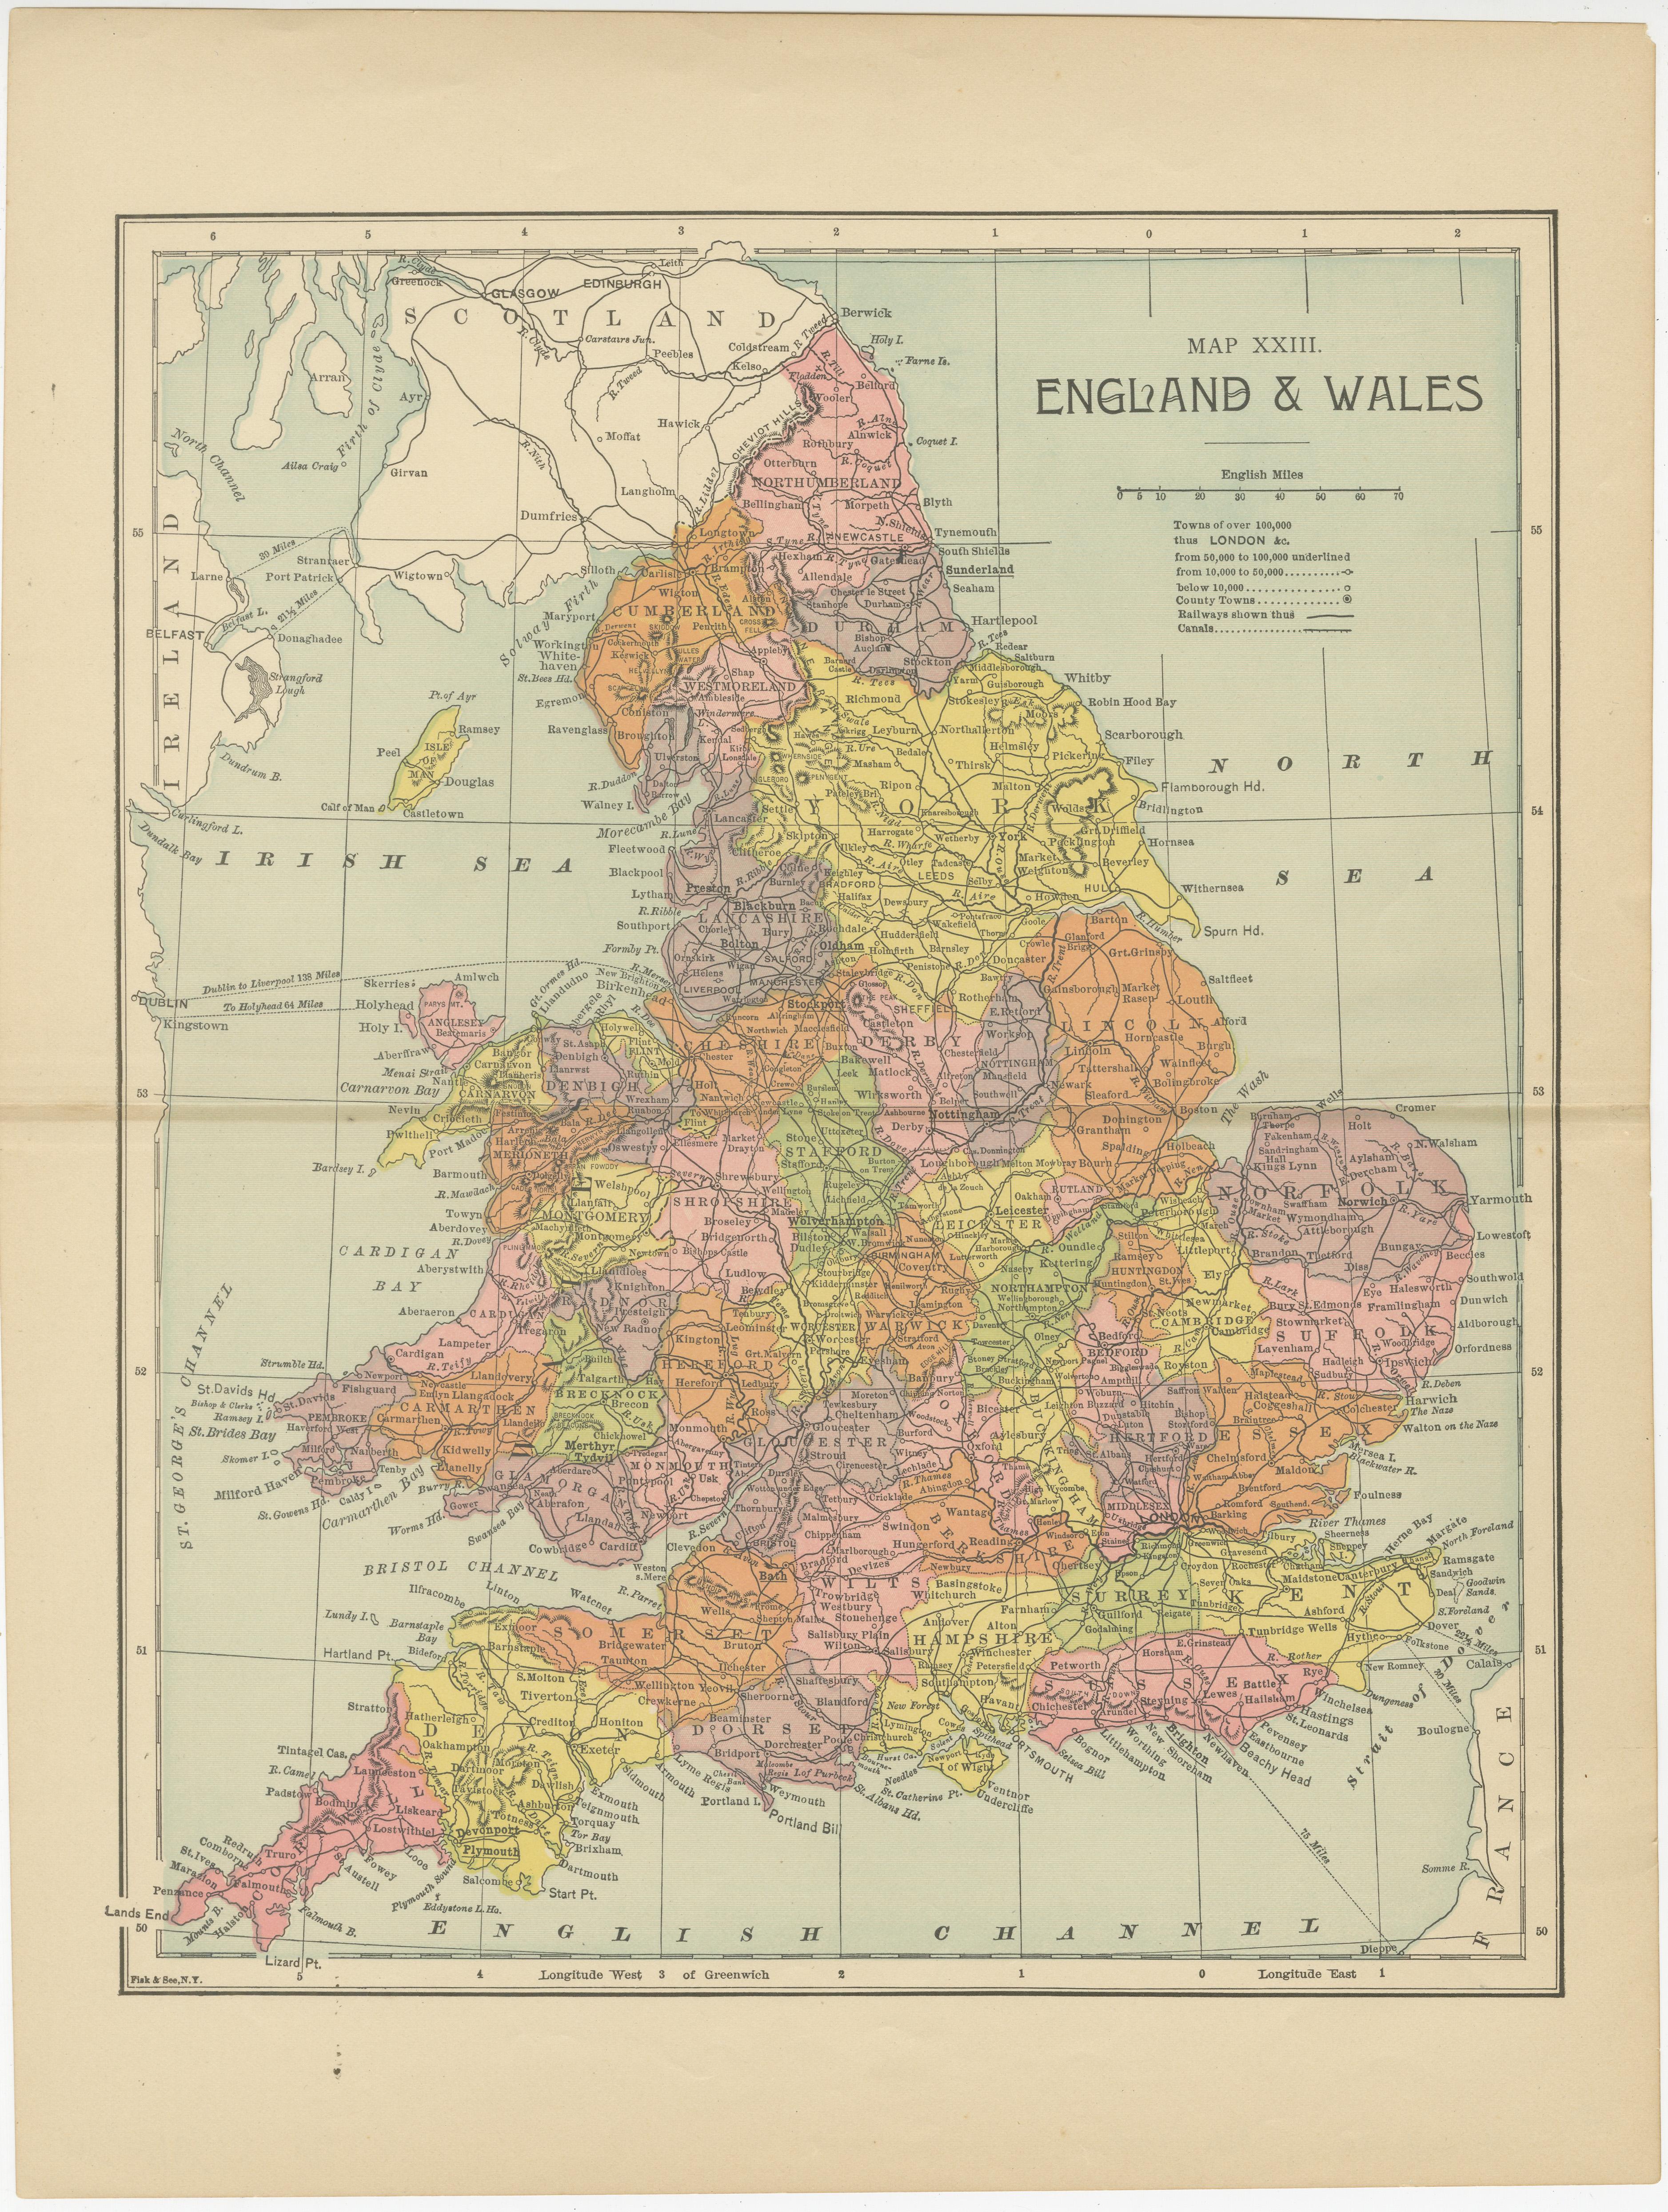 Original antique map titled 'Map XXIII England & Wales'. Lithographed map of England and Wales. Published by Fisk & See, circa 1890.